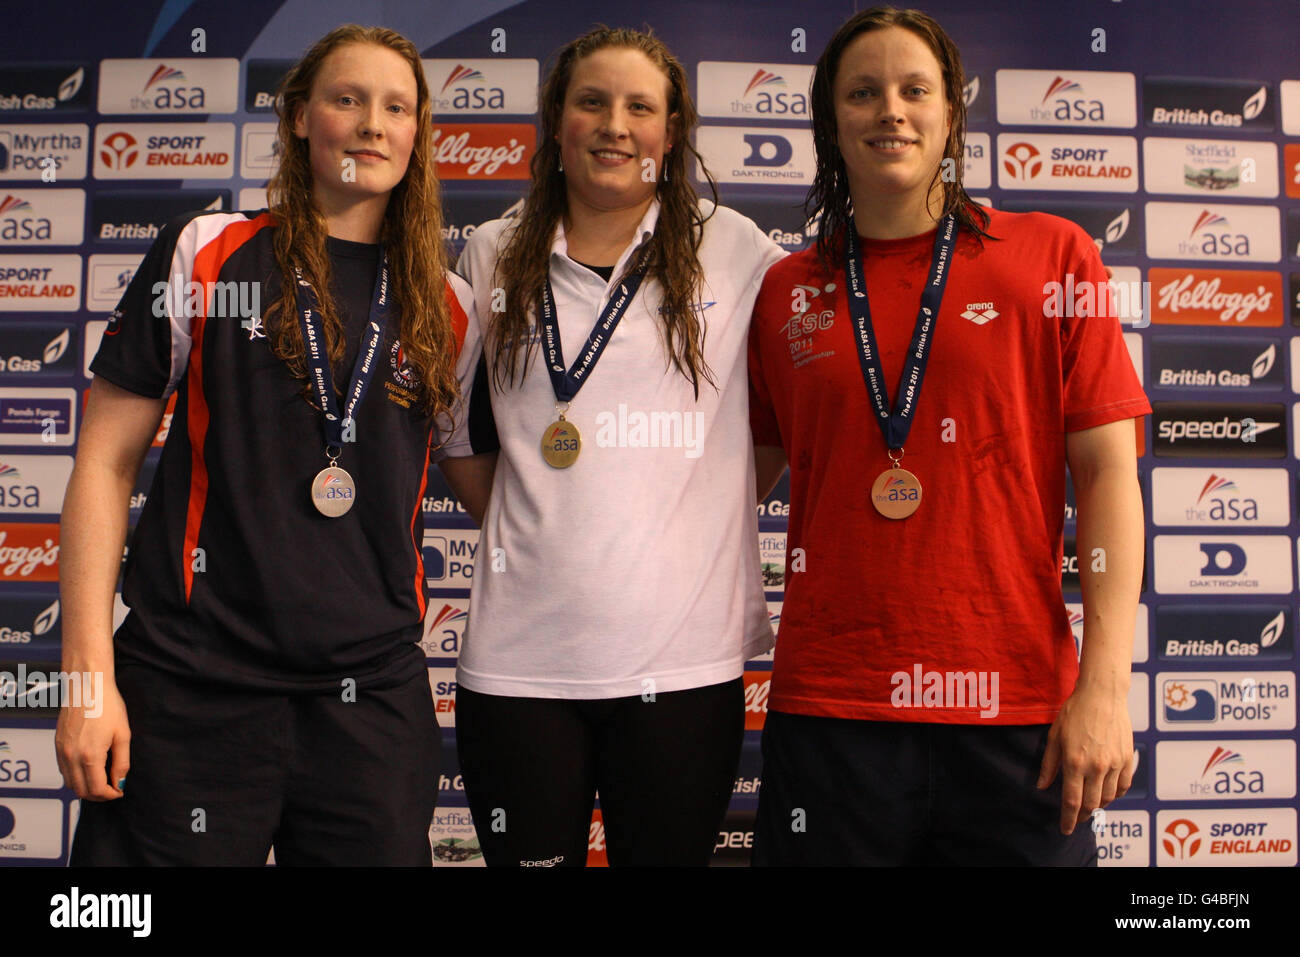 British swimmer Stacey Tadd (Gold) after winning the Women's Open 100m Breaststroke with Kathryn Johnstone (Silver) and Georgina Heyn (Bronze) during the ASA National Championships at Ponds Forge, Sheffield. Stock Photo